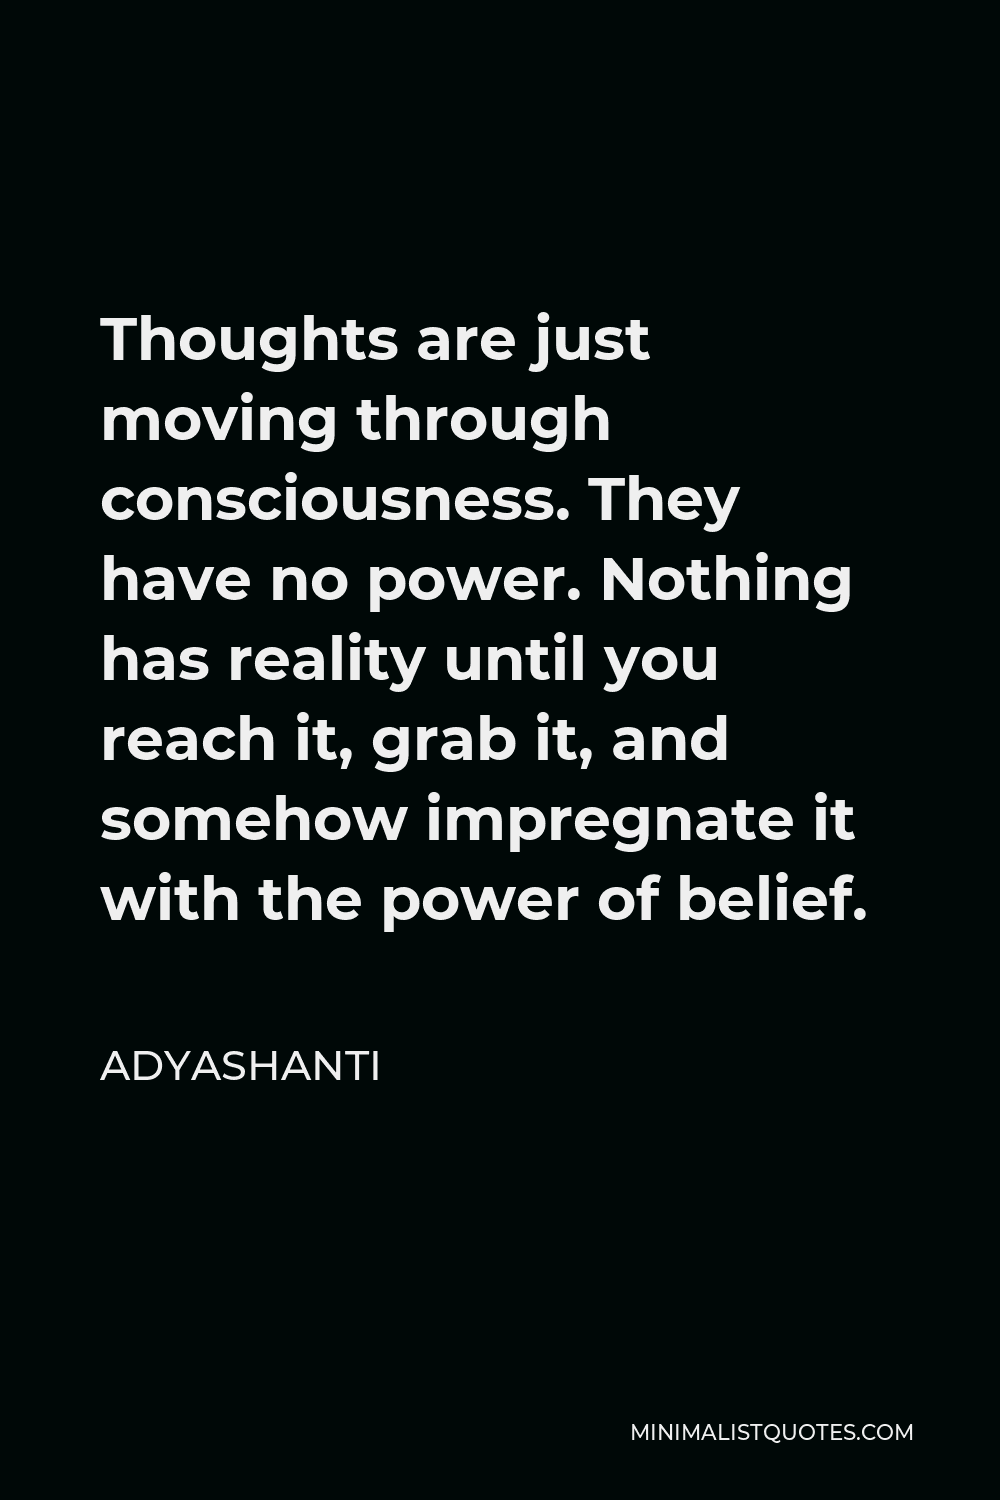 Adyashanti Quote - Thoughts are just moving through consciousness. They have no power. Nothing has reality until you reach it, grab it, and somehow impregnate it with the power of belief.